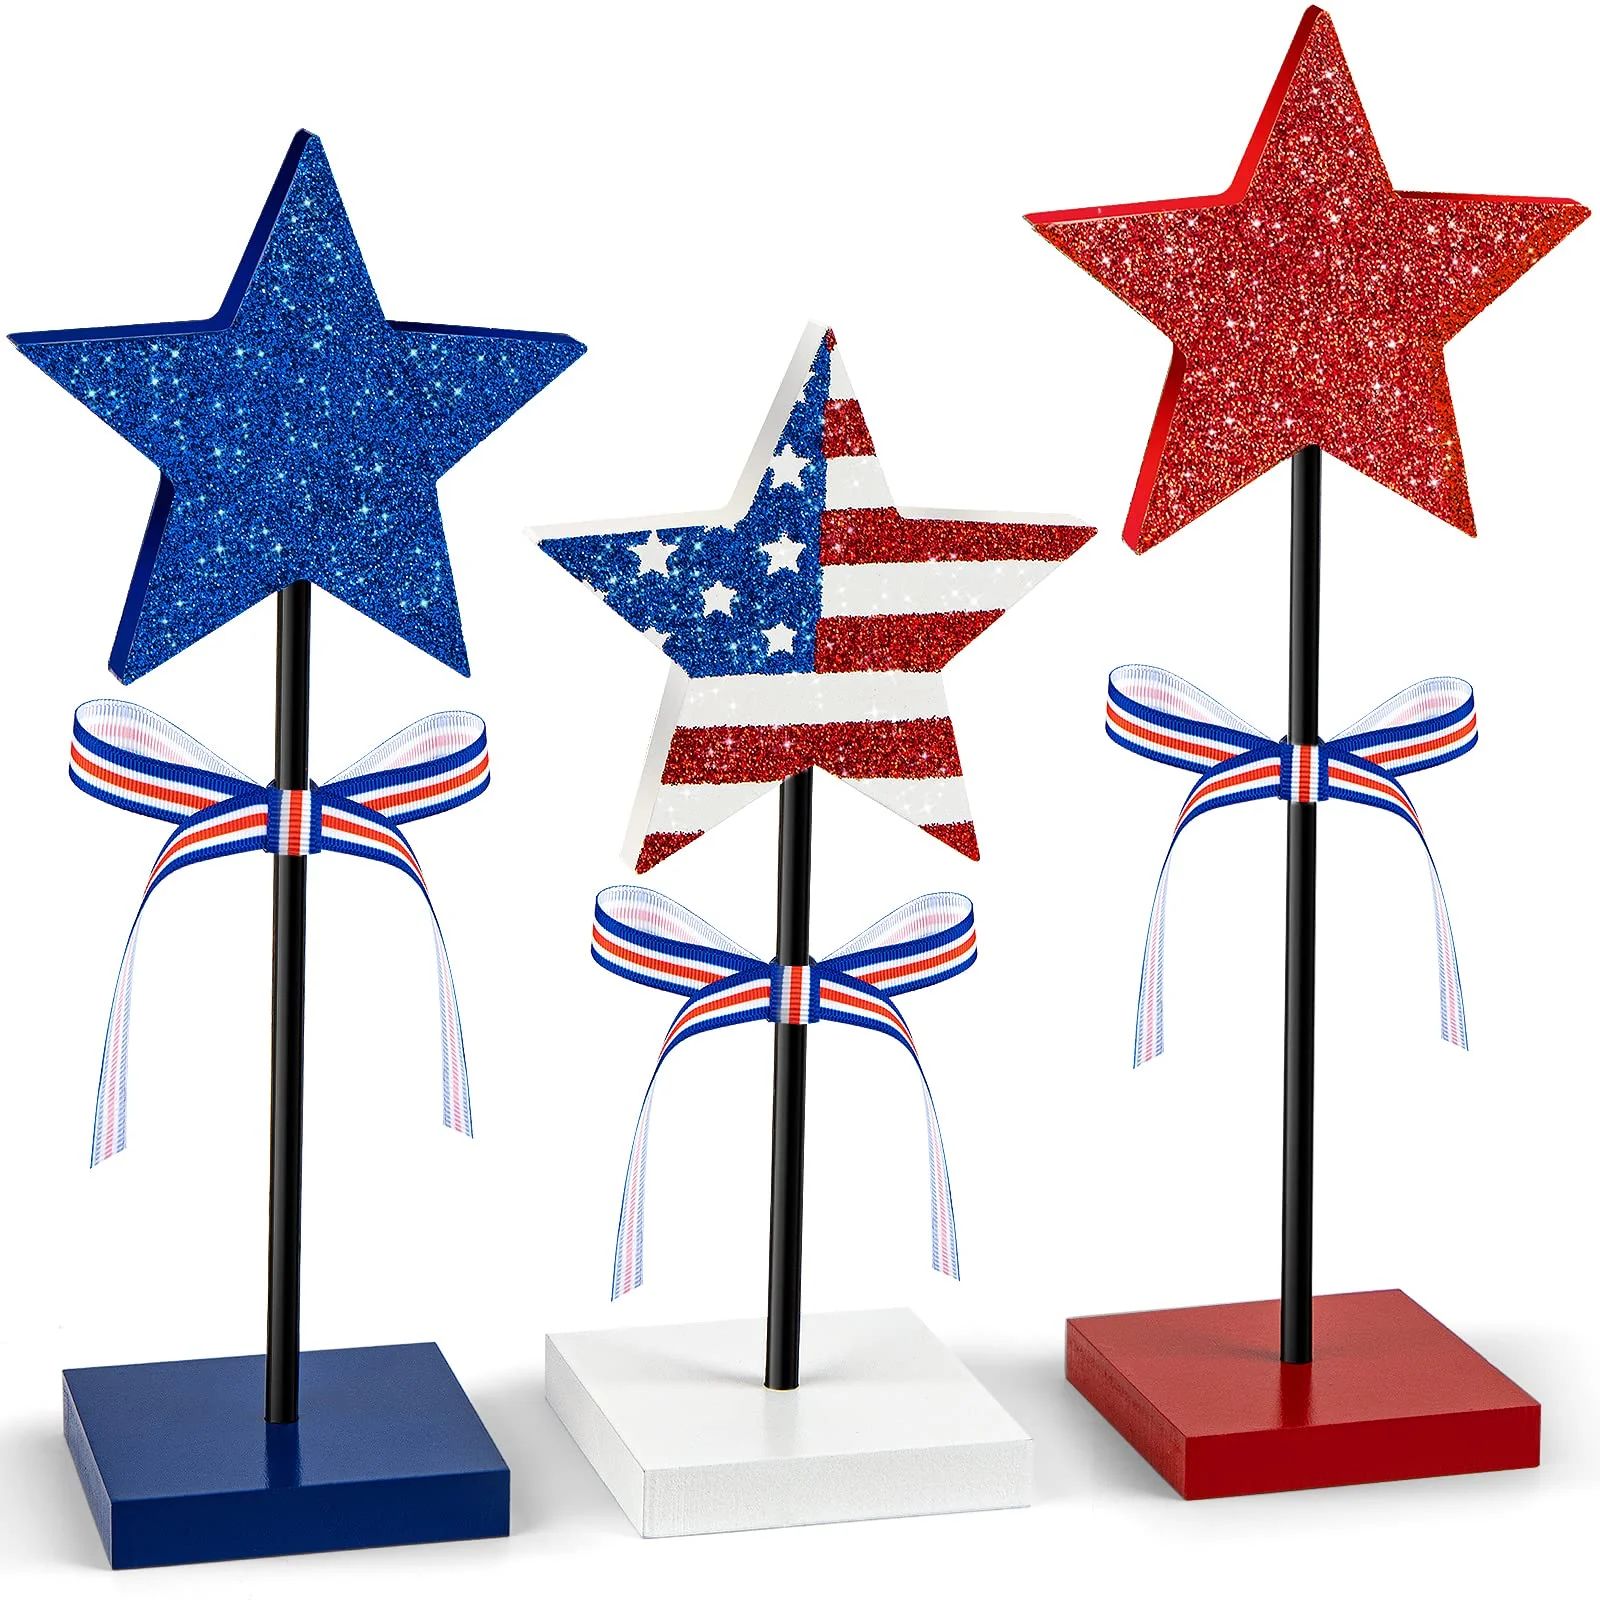 Husfou 3 Pcs Patriotic Tiered Tray Decorations, 4th of July Red Blue White Star Tabletop Centerpi... | Walmart (US)